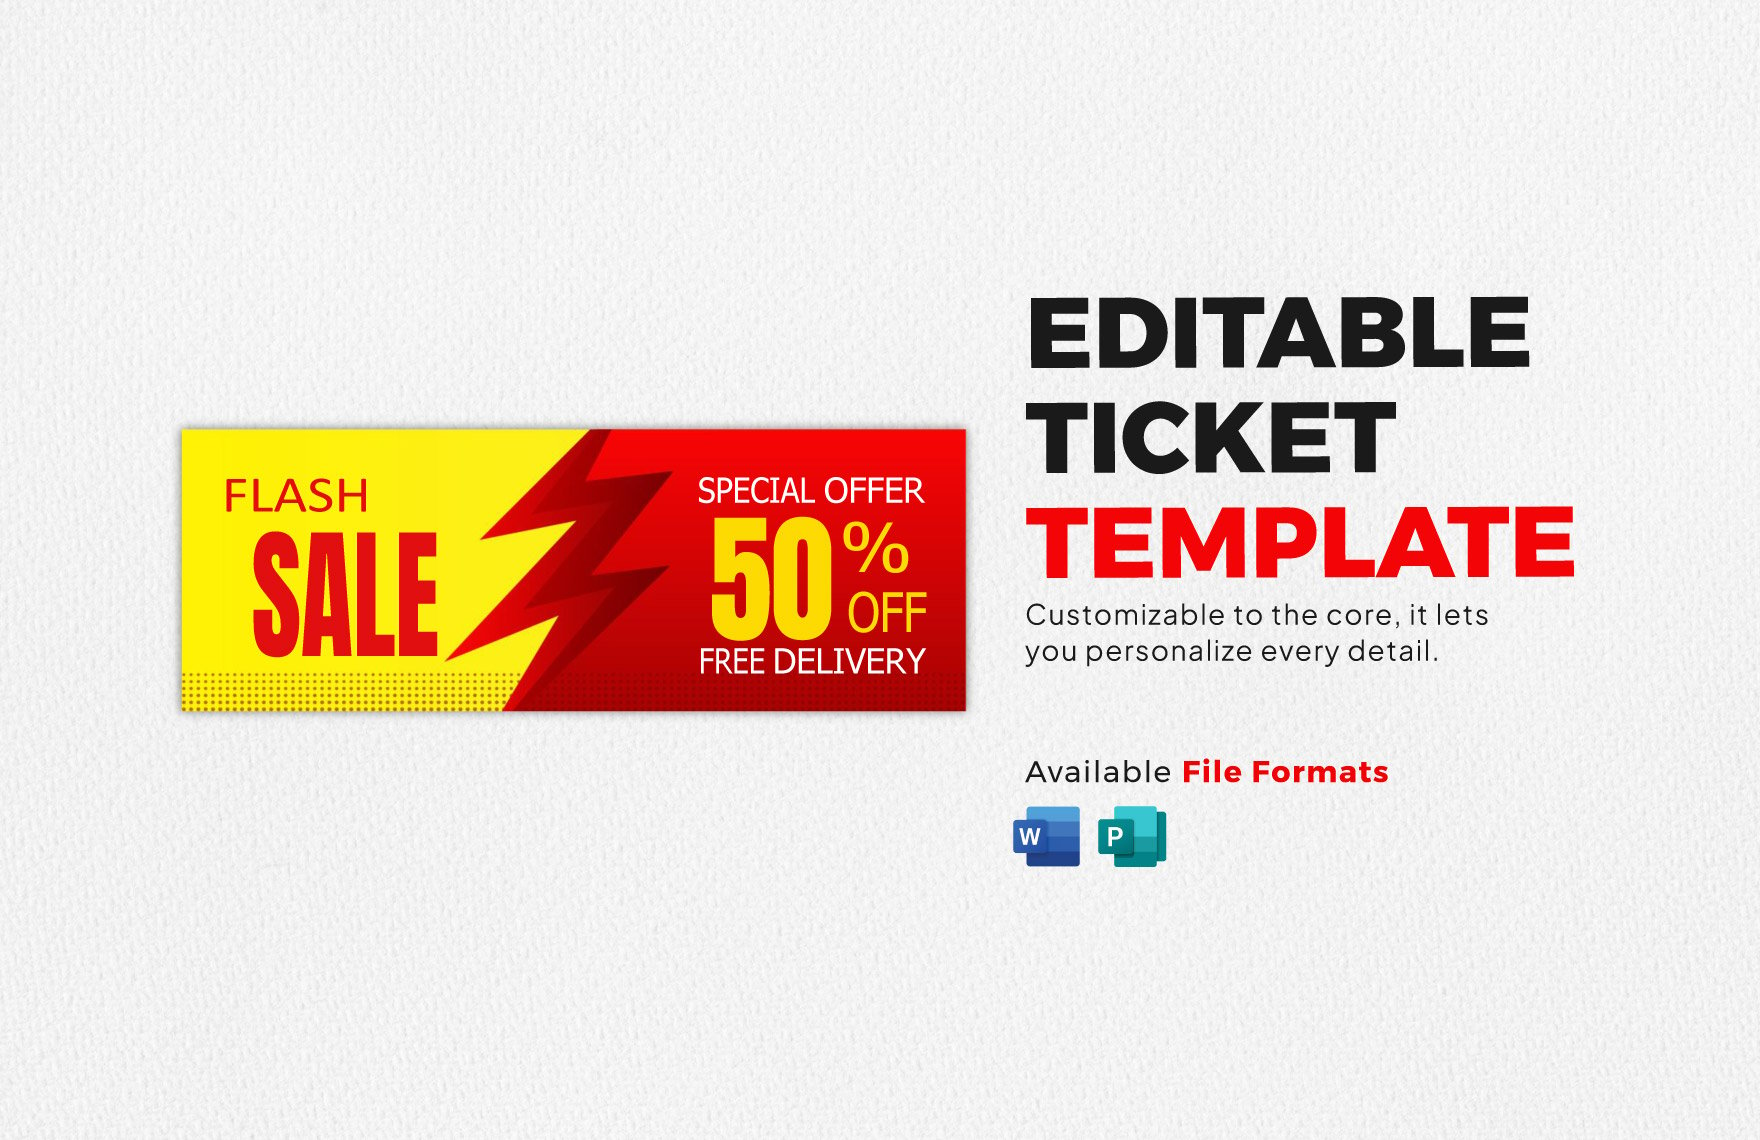 Editable Ticket Template in Word, Publisher